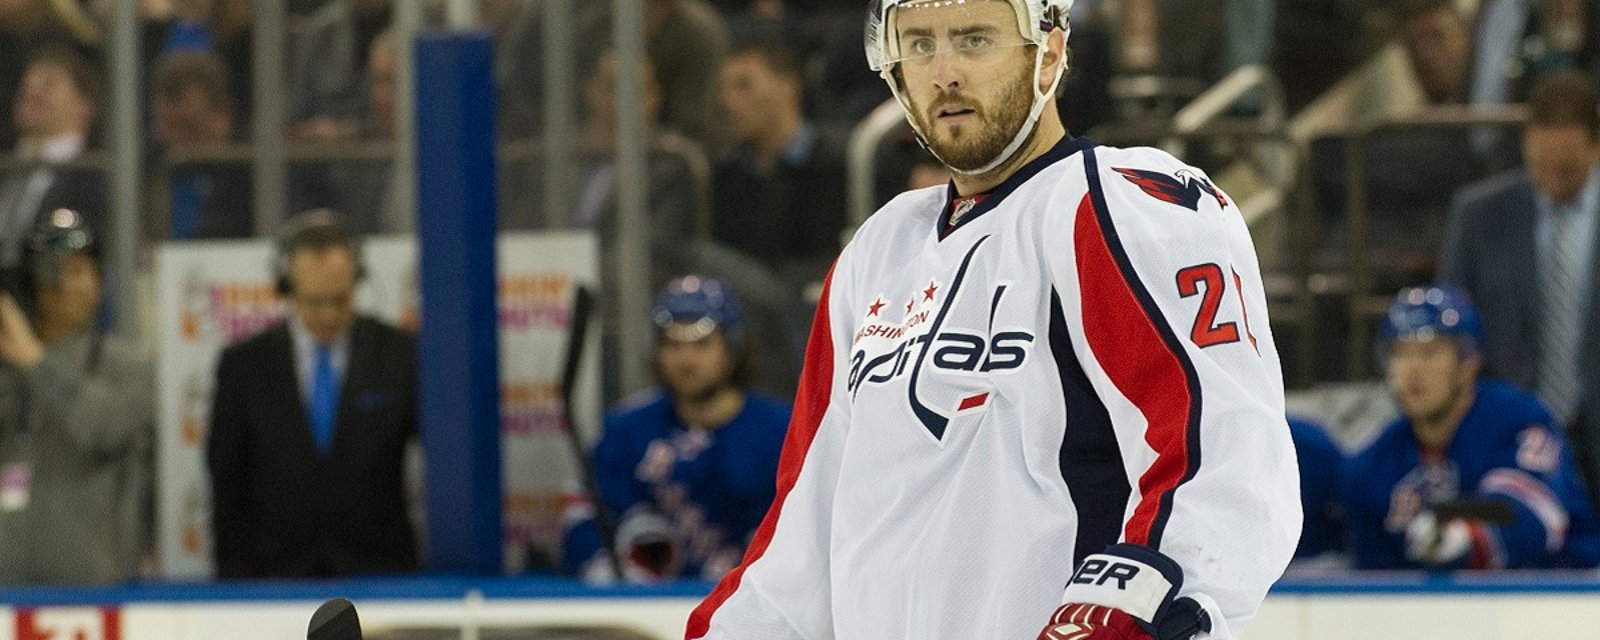 Update: There are now conflicting reports regarding Kevin Shattenkirk.